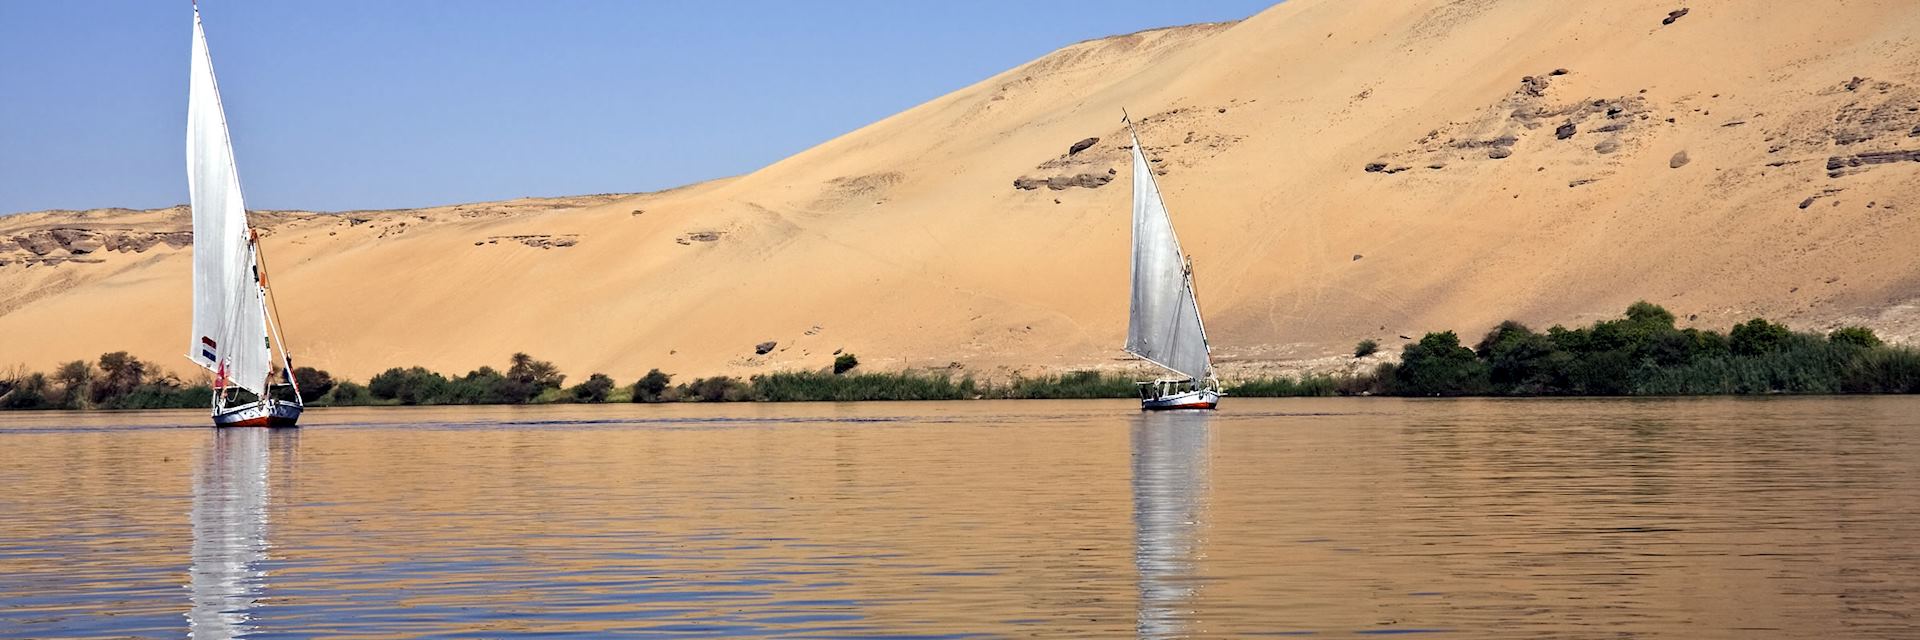 Felucca boats on the River Nile